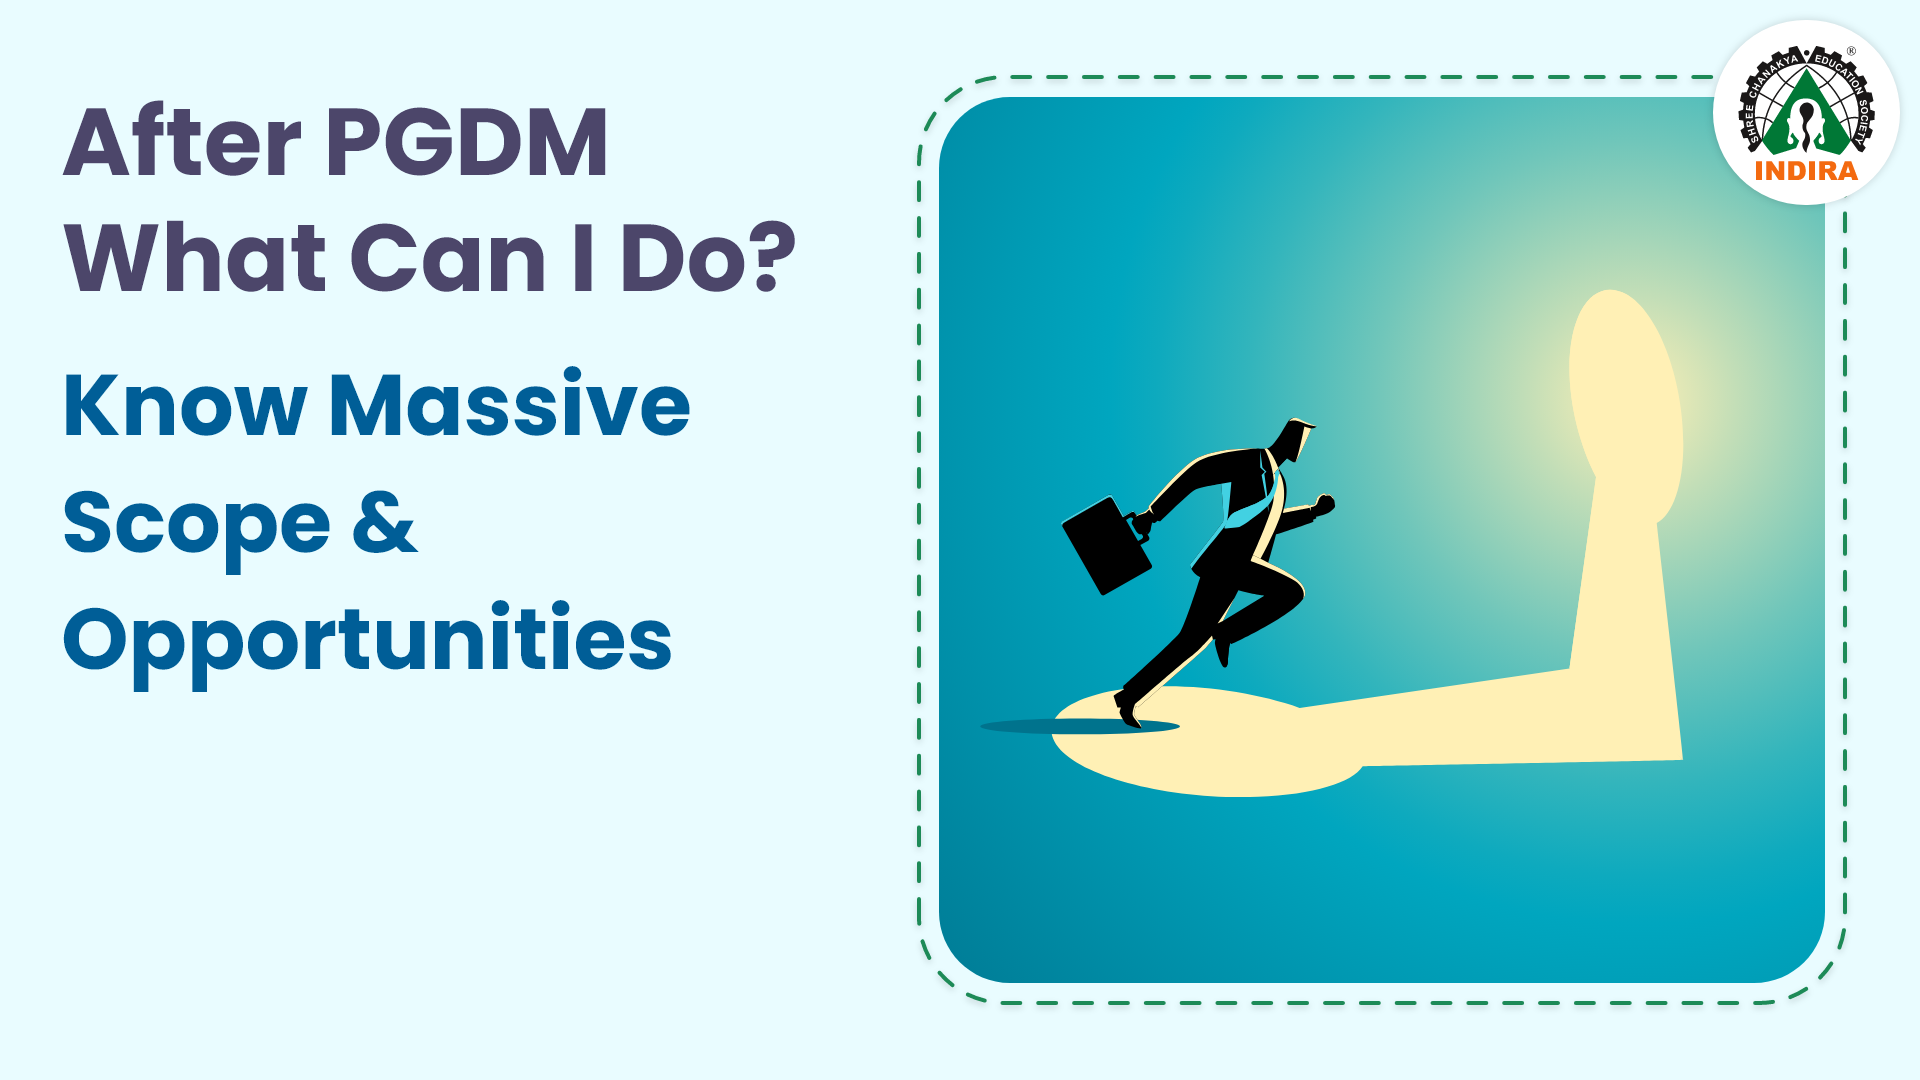 After PGDM What Can I Do? Know Massive Scope & Opportunities